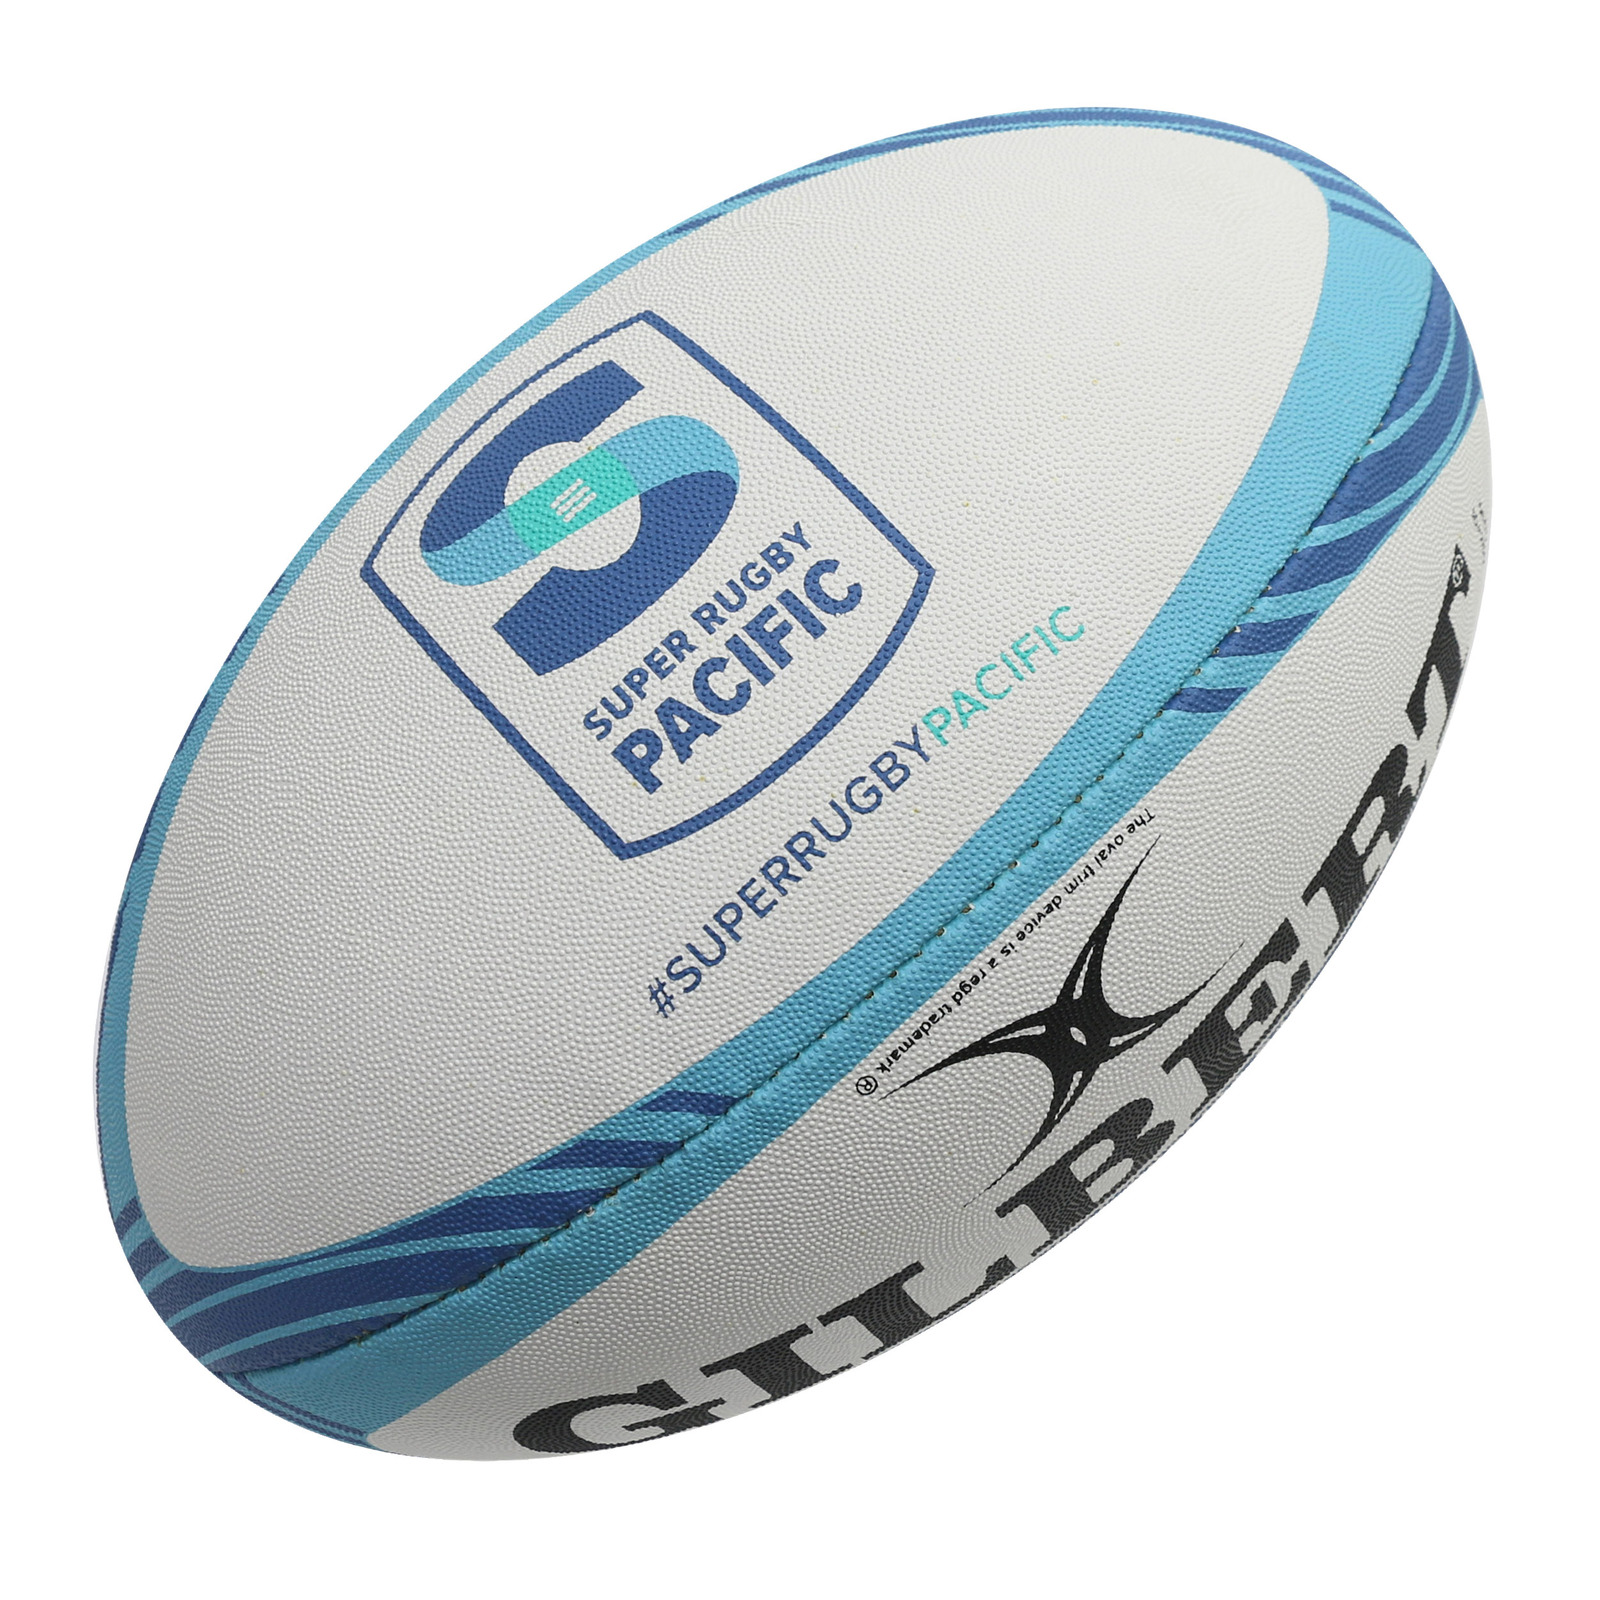 Gilbert Super Rugby AUS Replica Rugby Union Ball For Sale BallSports Australia